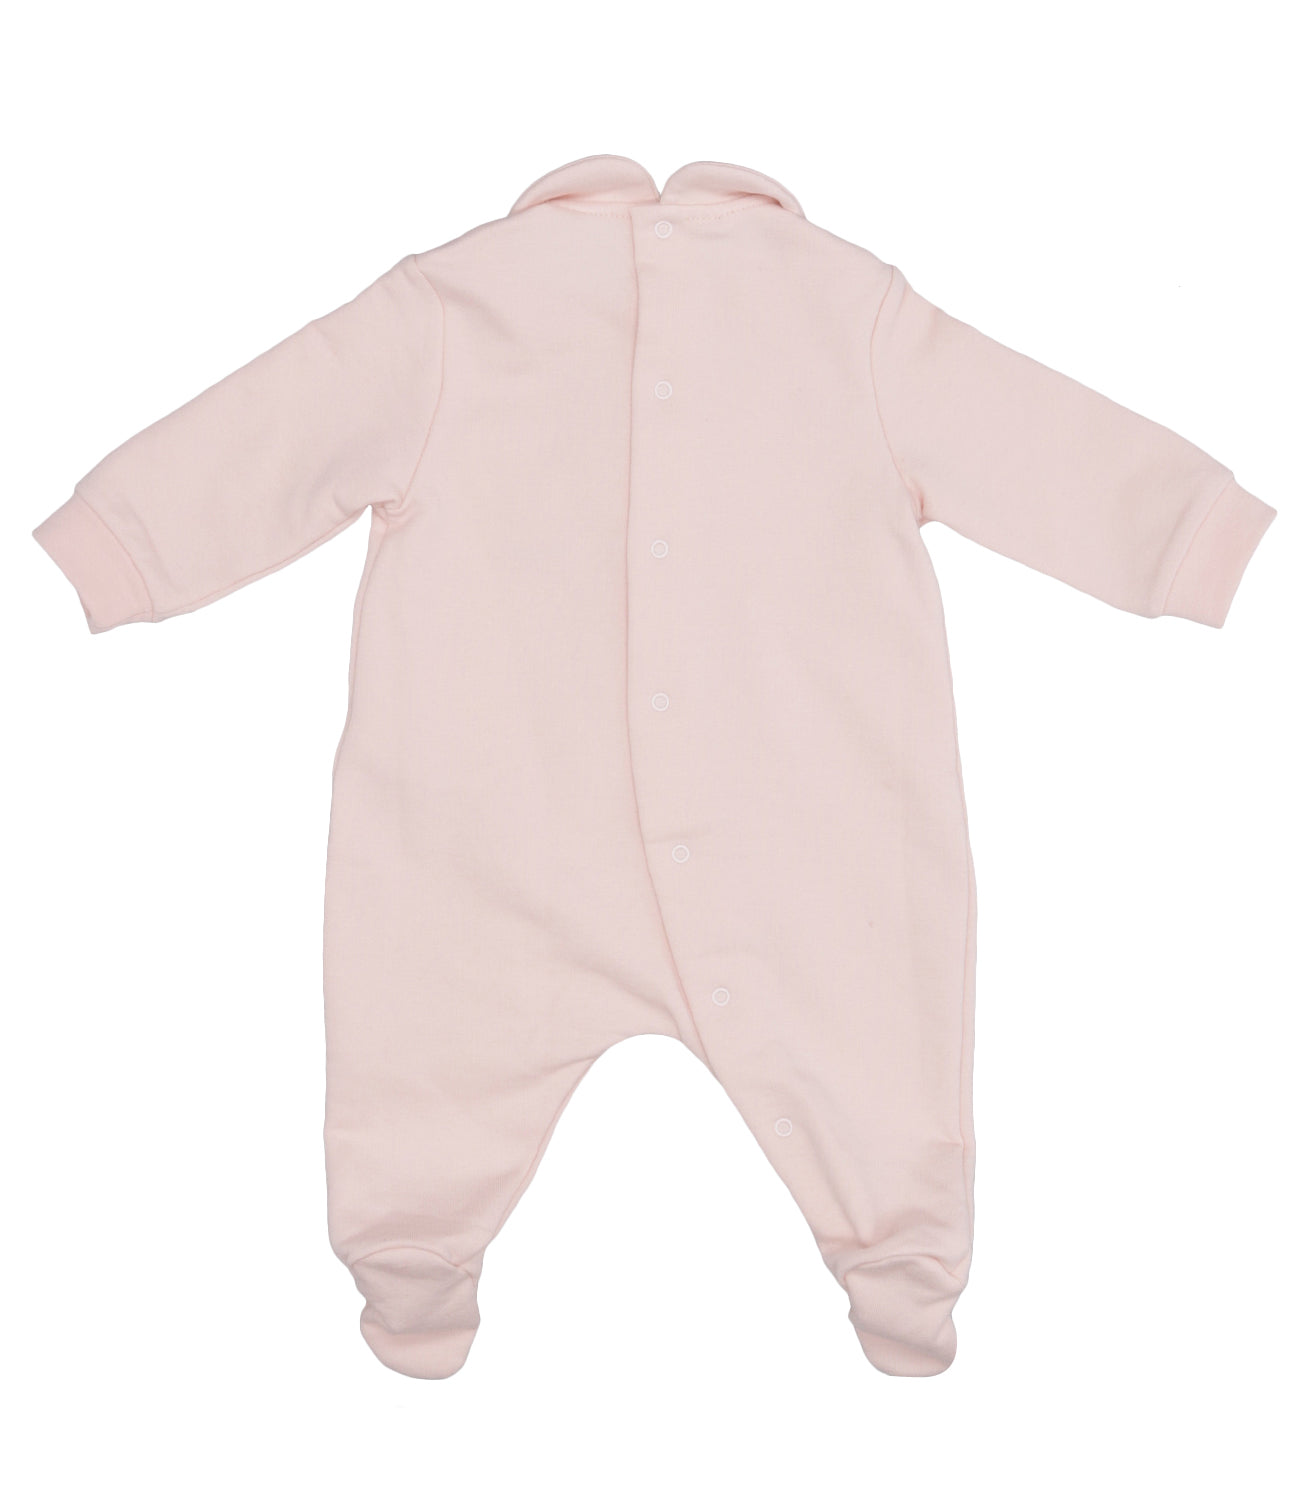 The Owl | Pink and Cream Sleepsuit